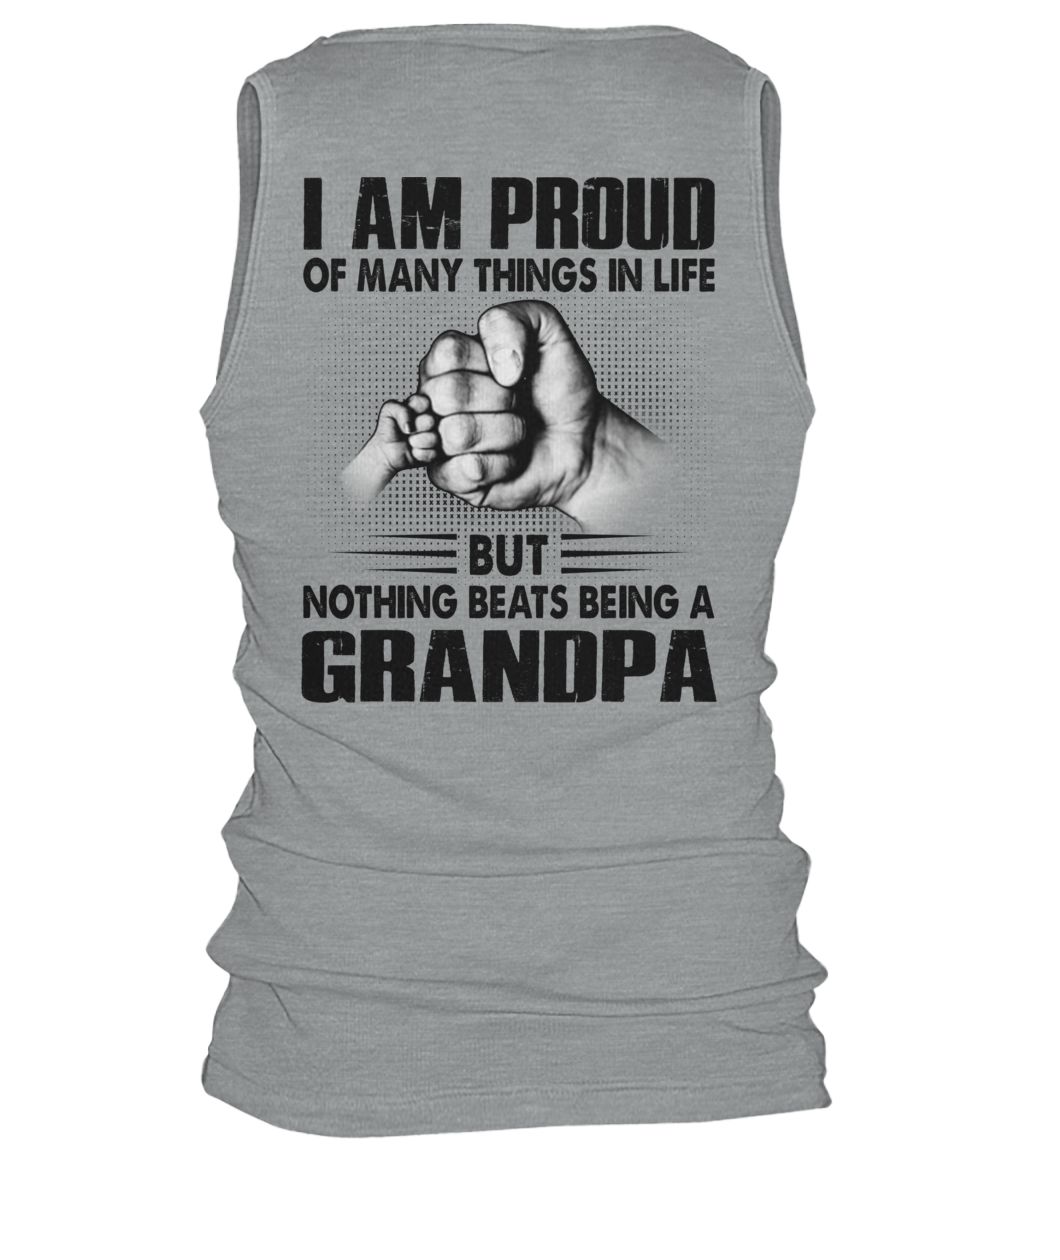 I am proud of many things in life but nothing beats being a grandpa men's tank top